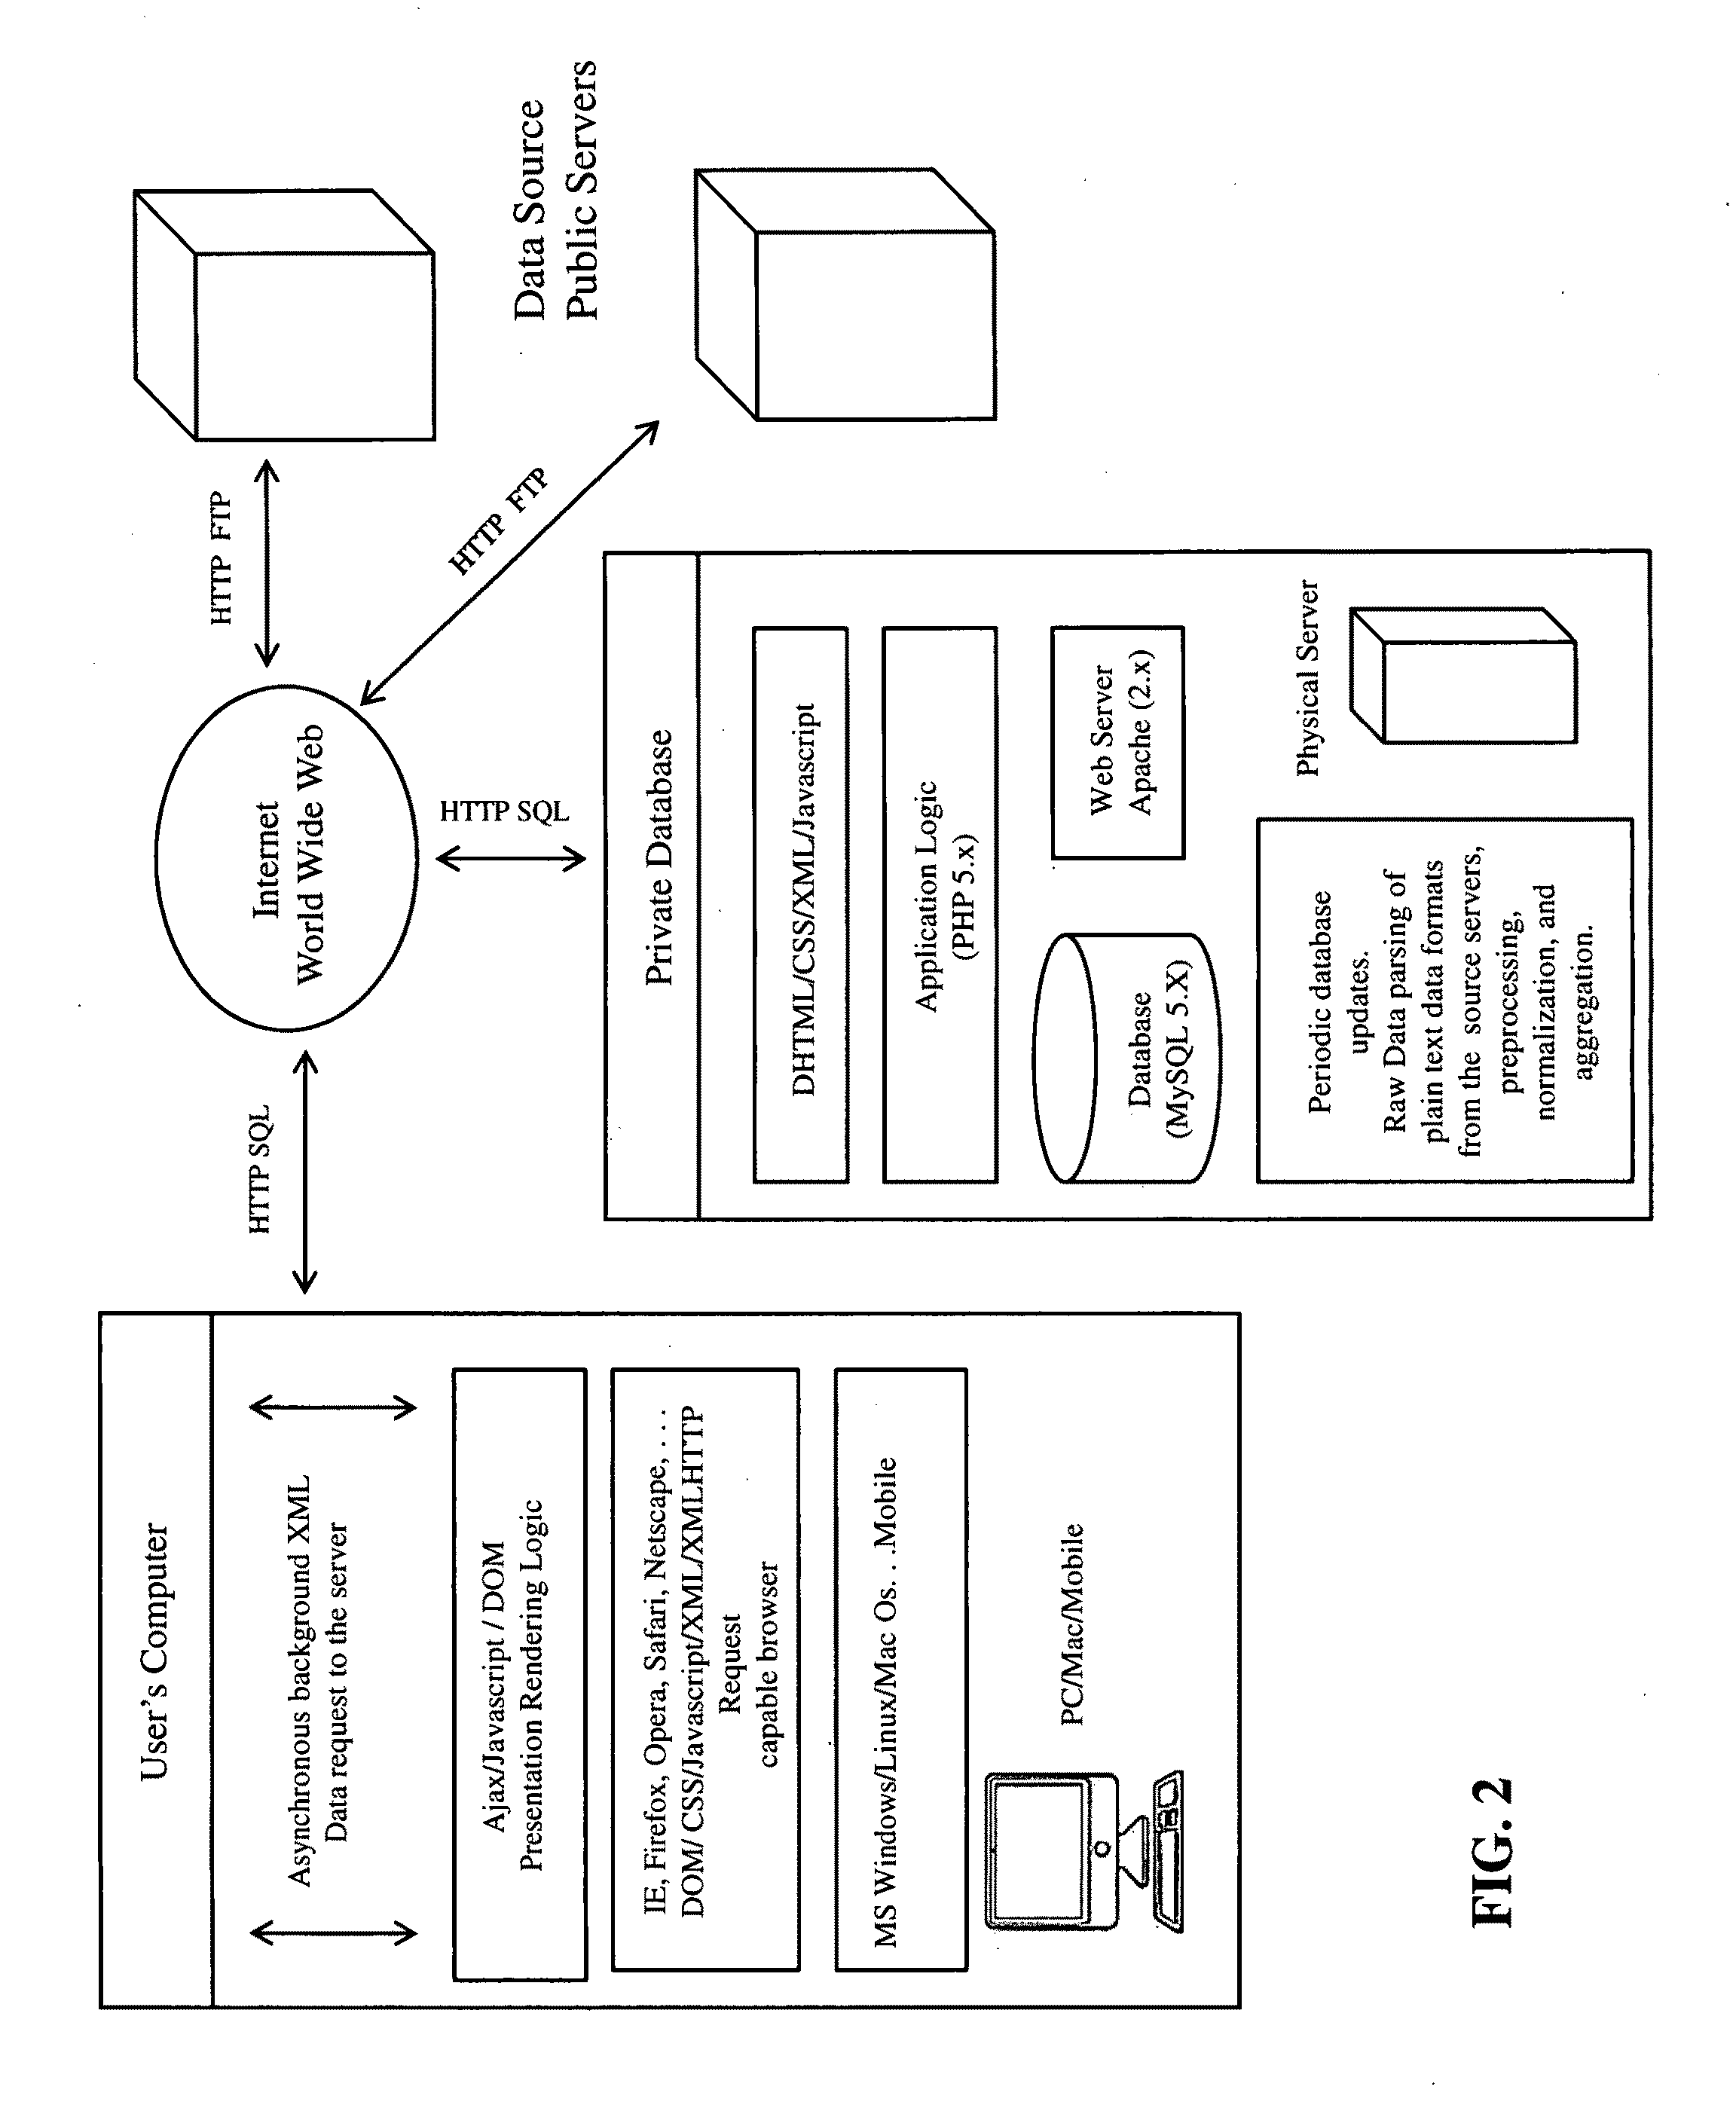 Method and system for informed decision making to locate a workforce